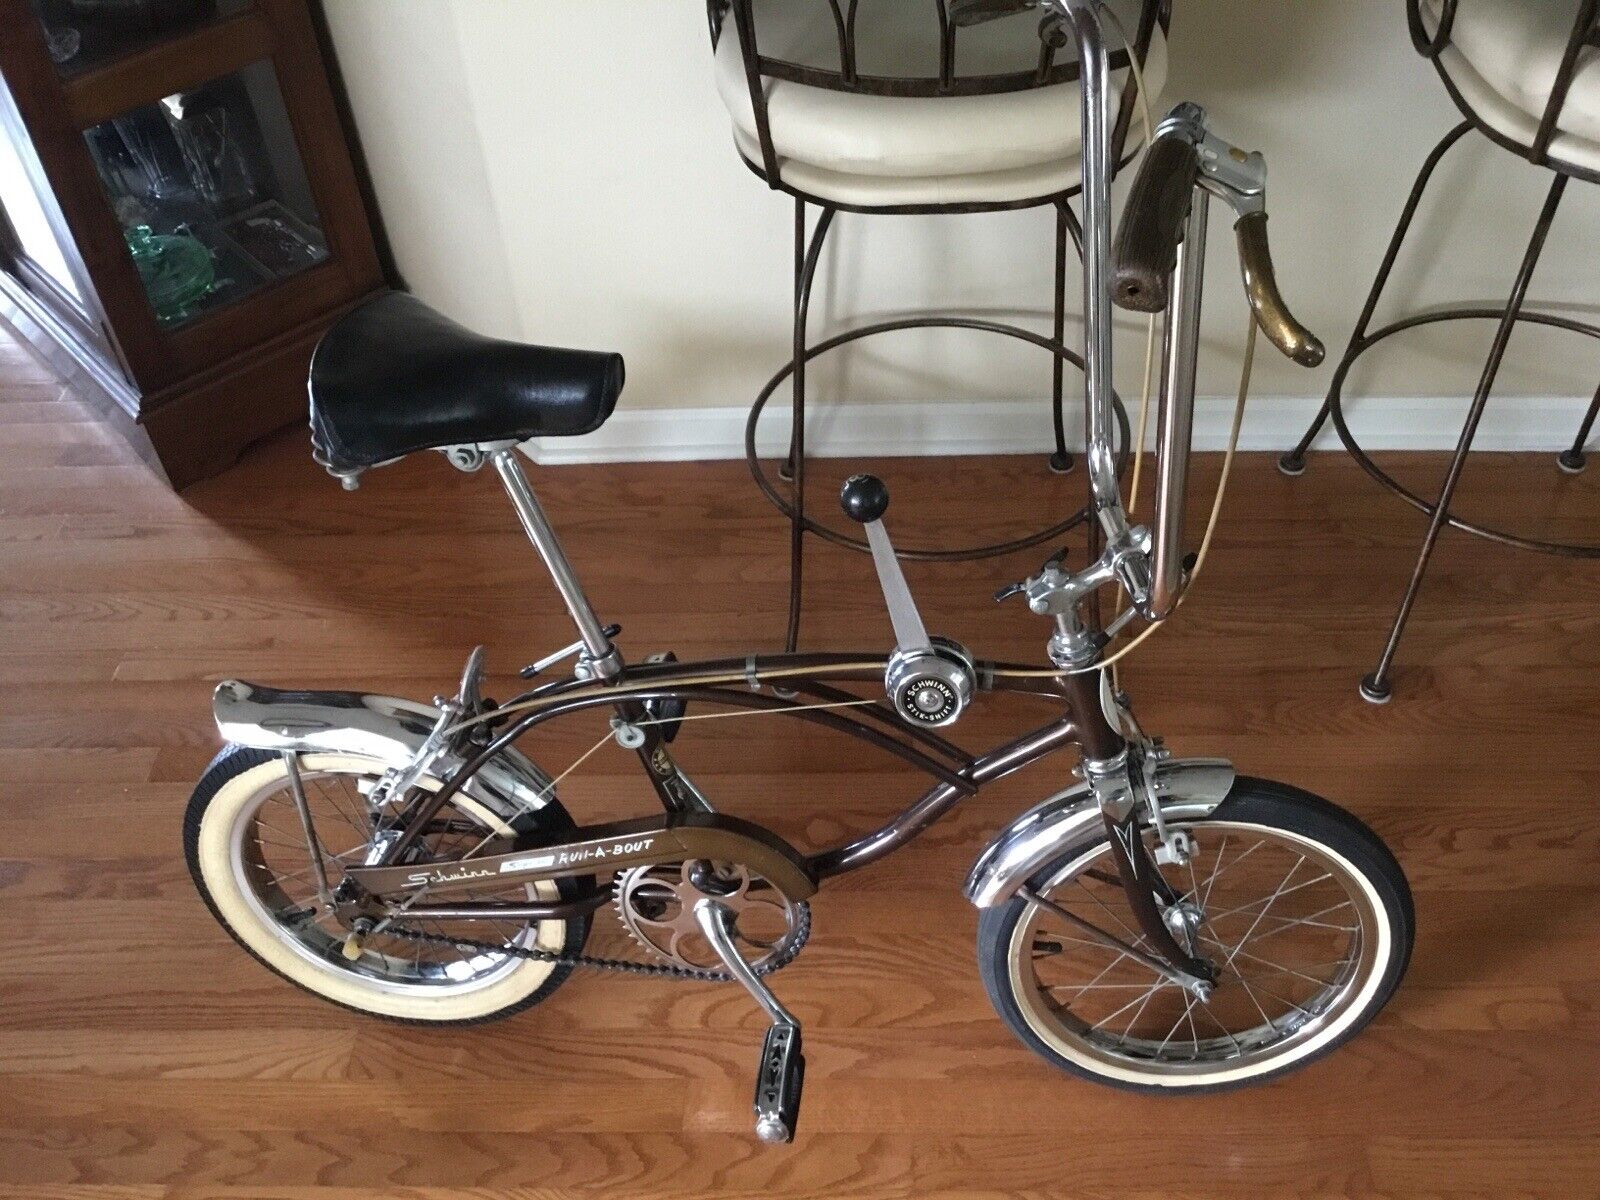 1968 Schwinn stingray Runabout- Excellent Condition For Age